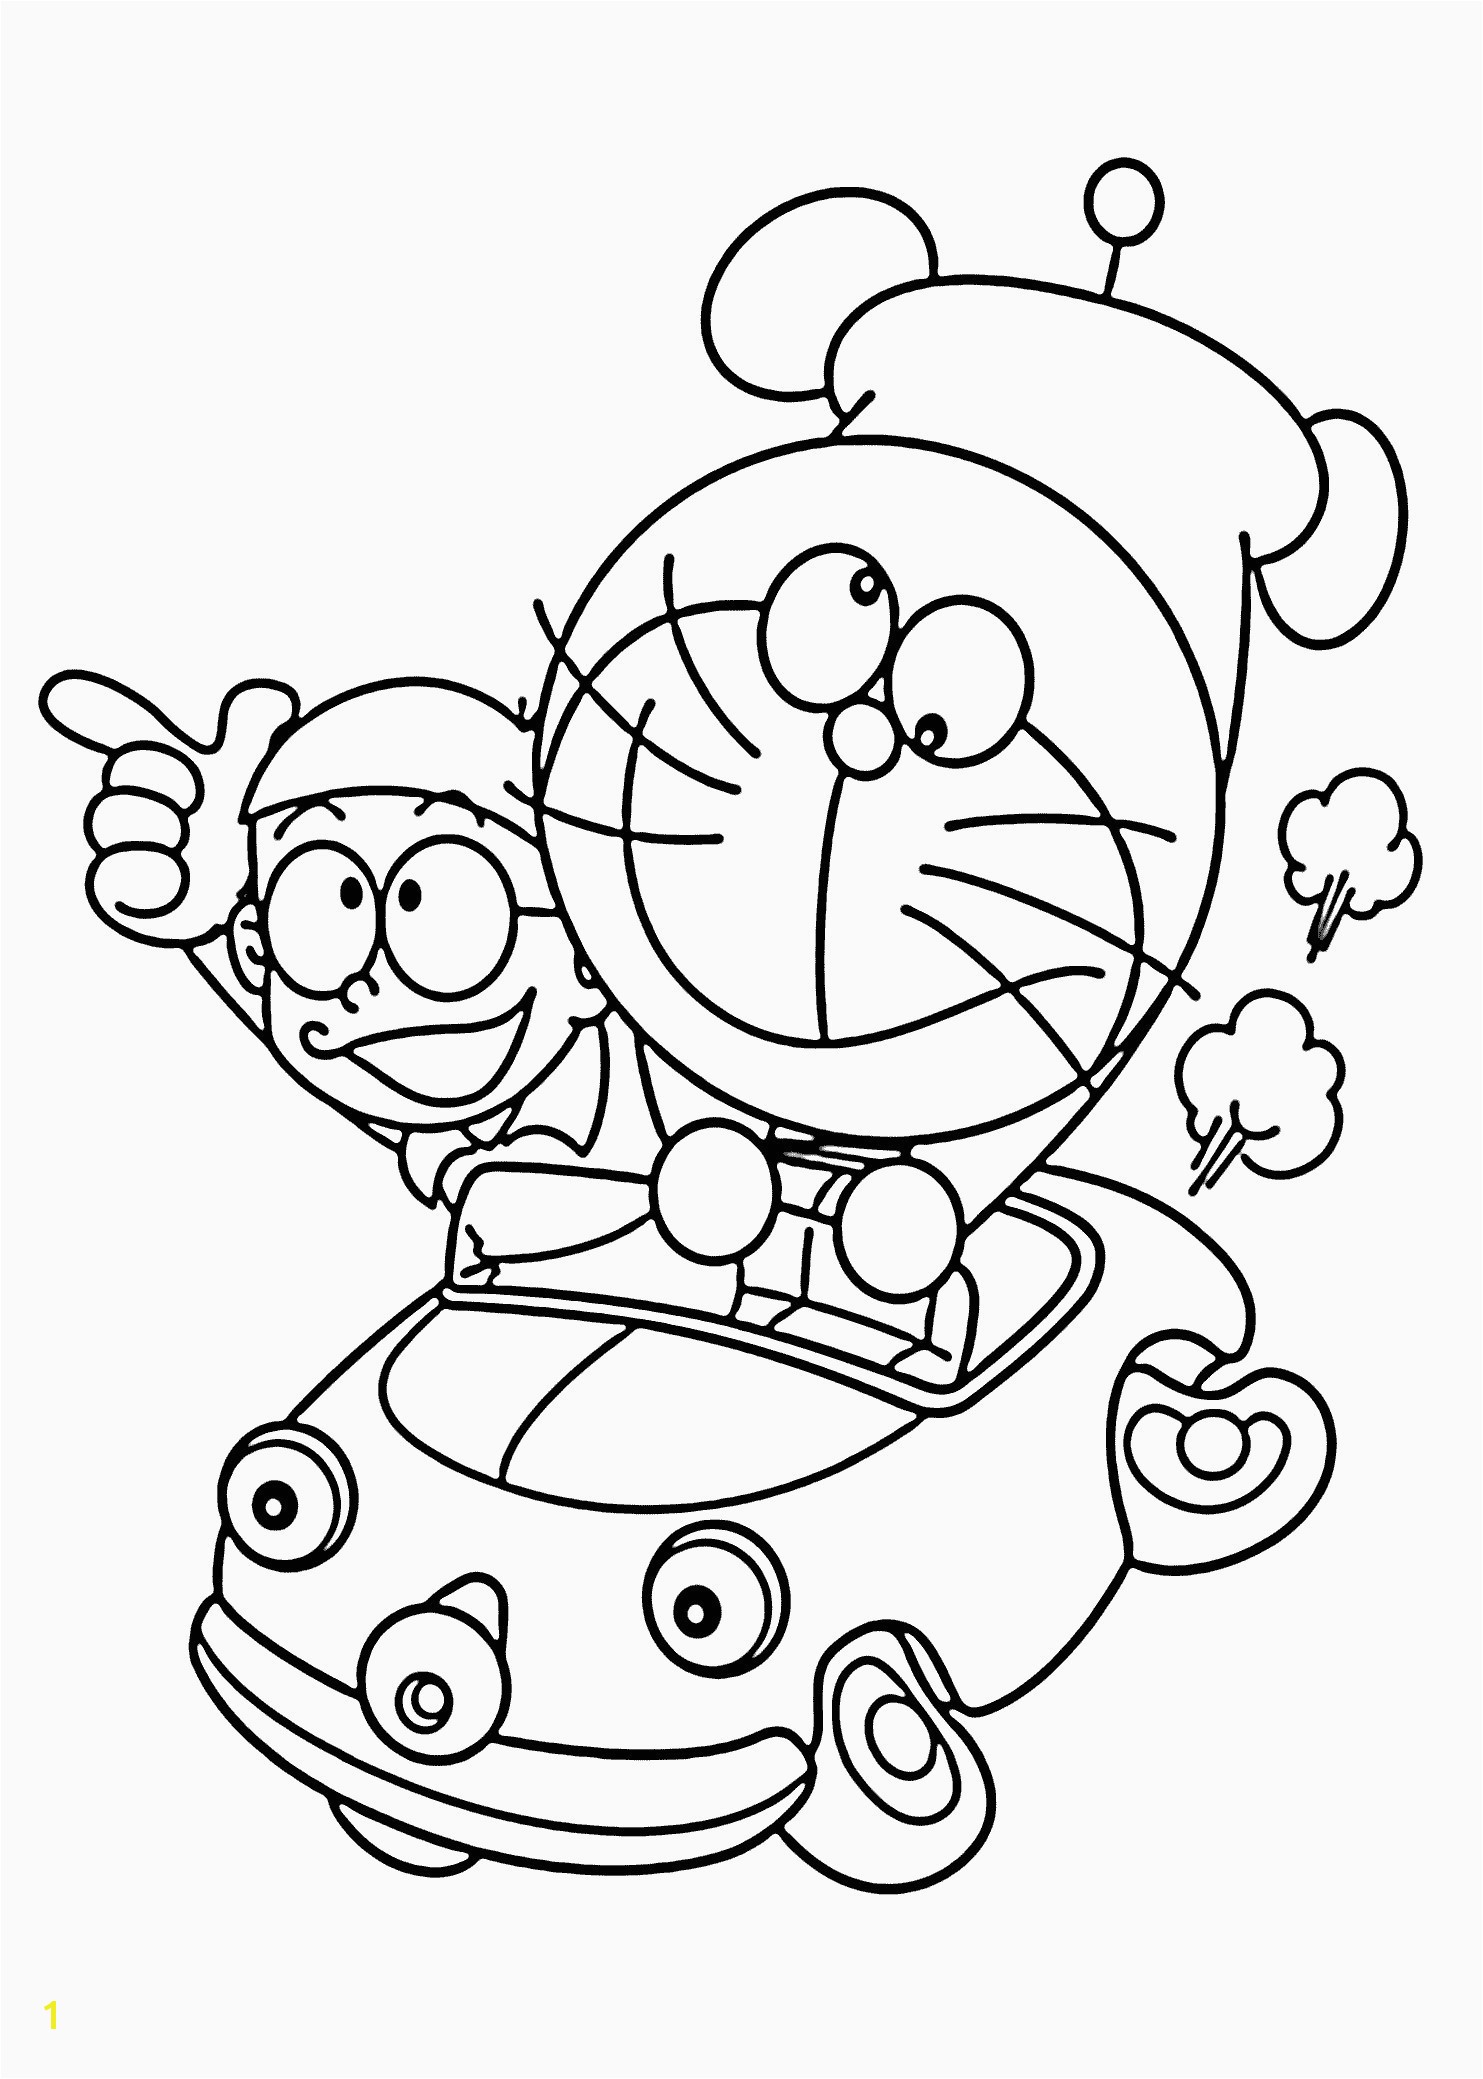 Childrens Printable Coloring Pages Color Page for Kids Printable Coloring Sheets for Kids Beautiful